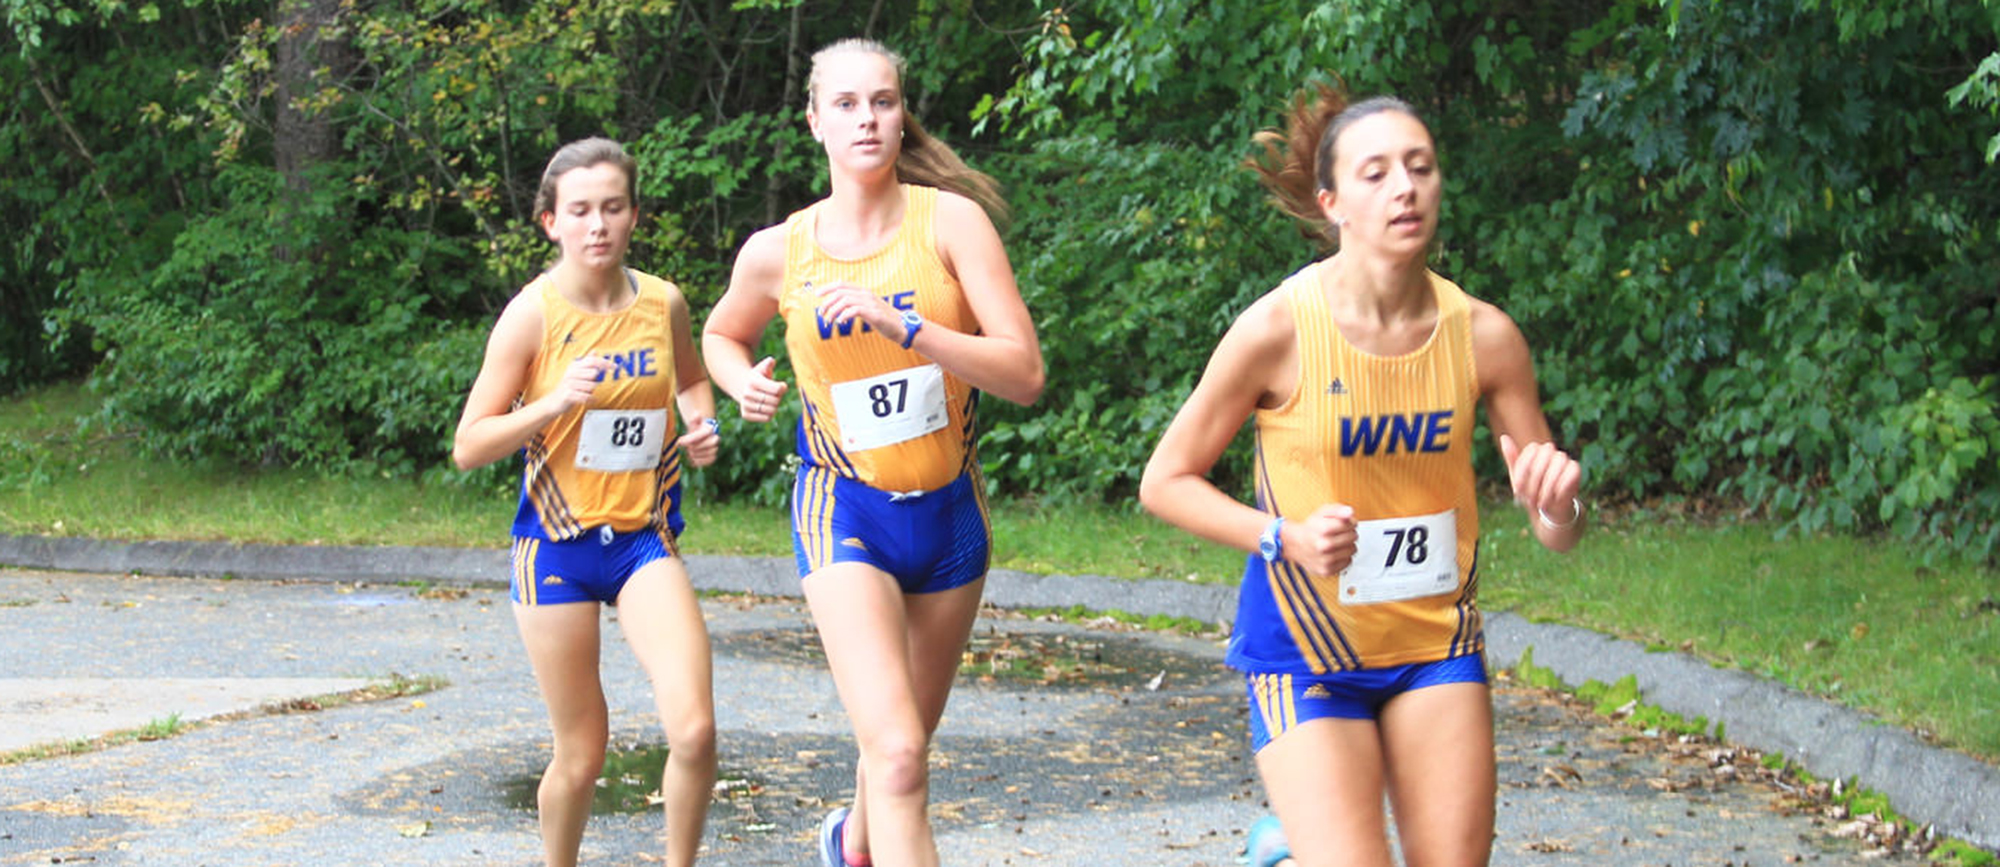 Townsend Leads Golden Bears at Western New England Invitational